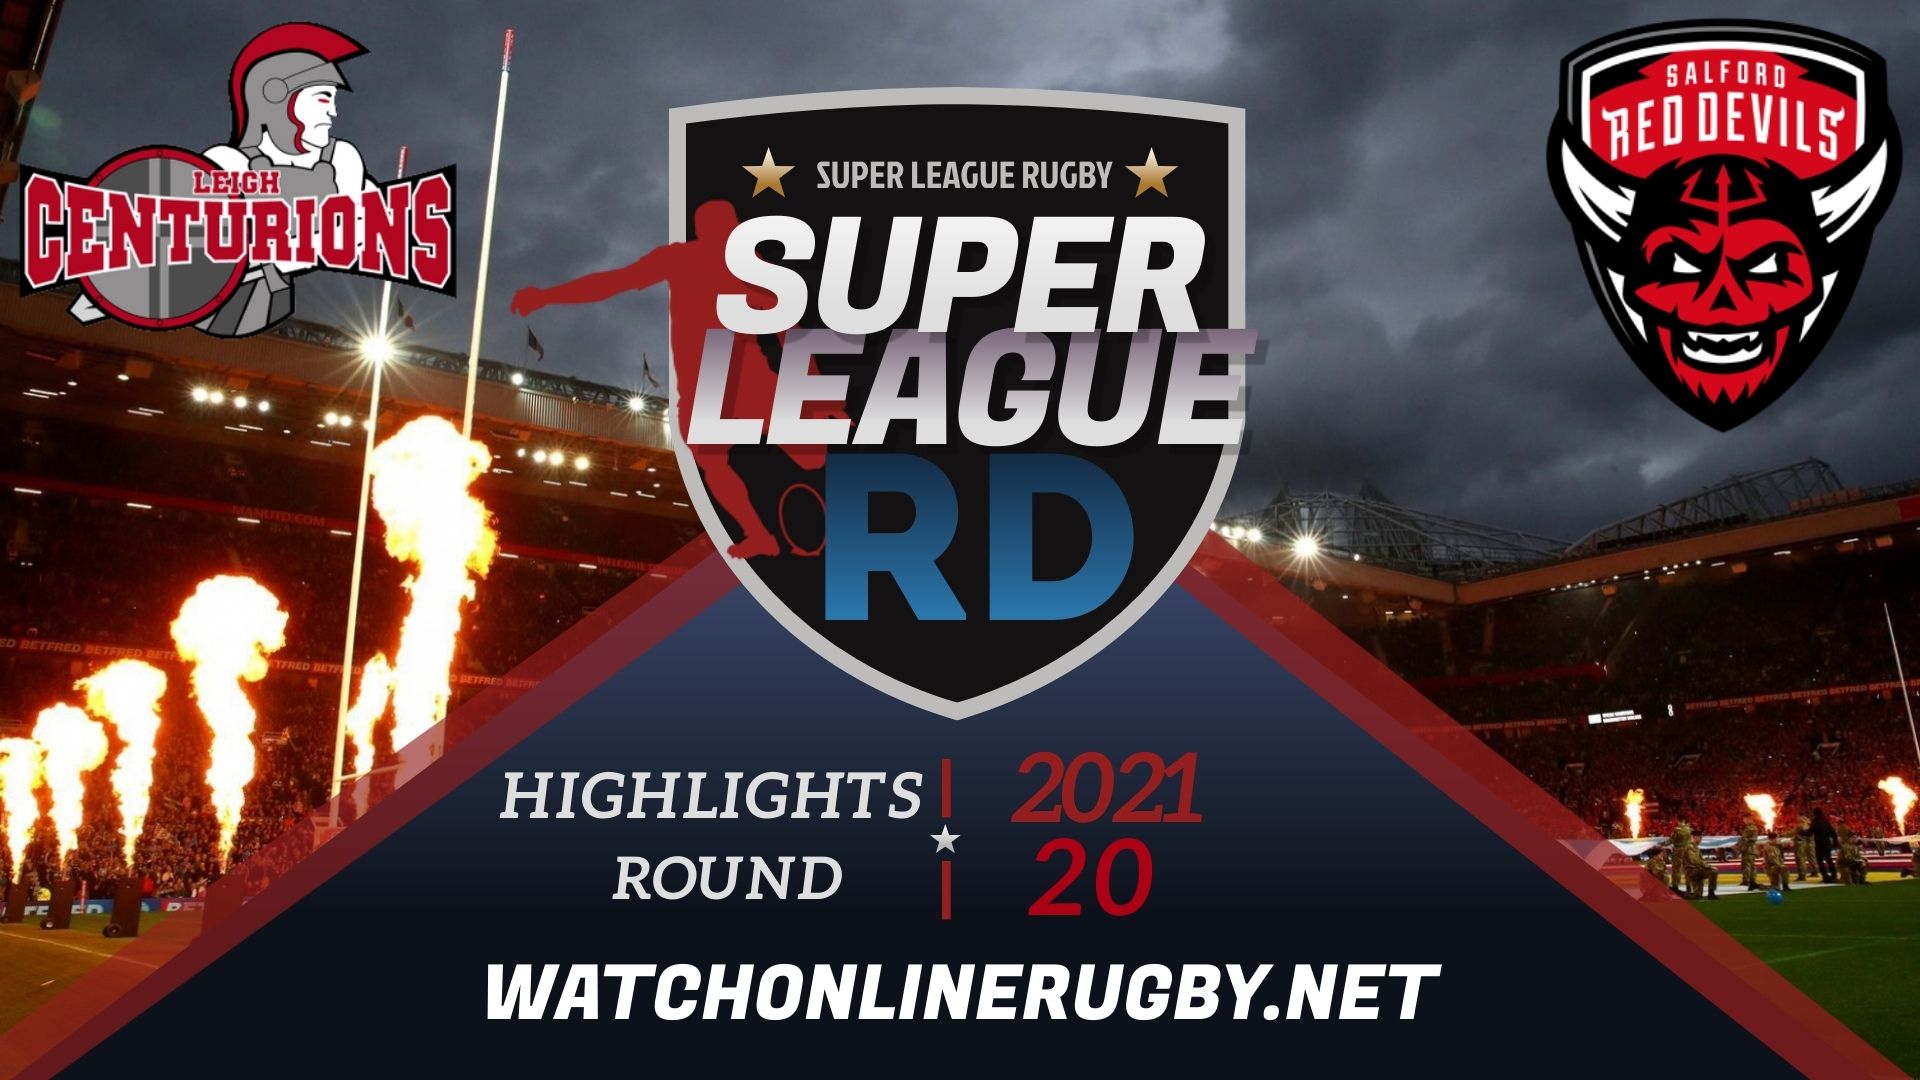 Leigh Centurions Vs Salford Red Devils Super League Rugby 2021 RD 20